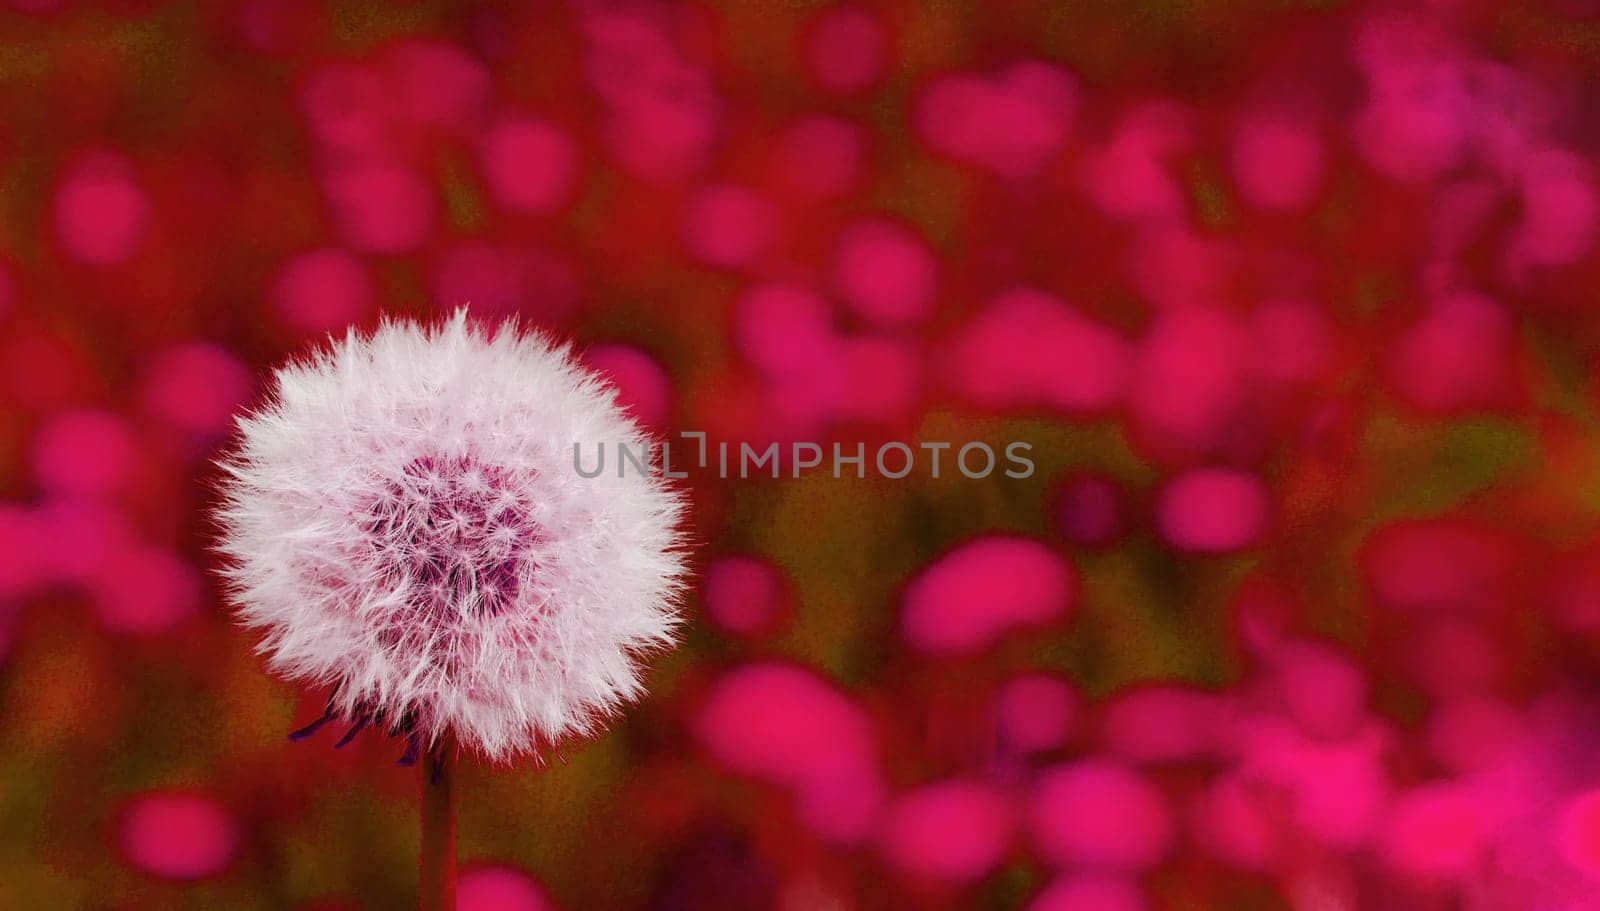 Abstract image of a white dandelion on a red mottled background. by gelog67